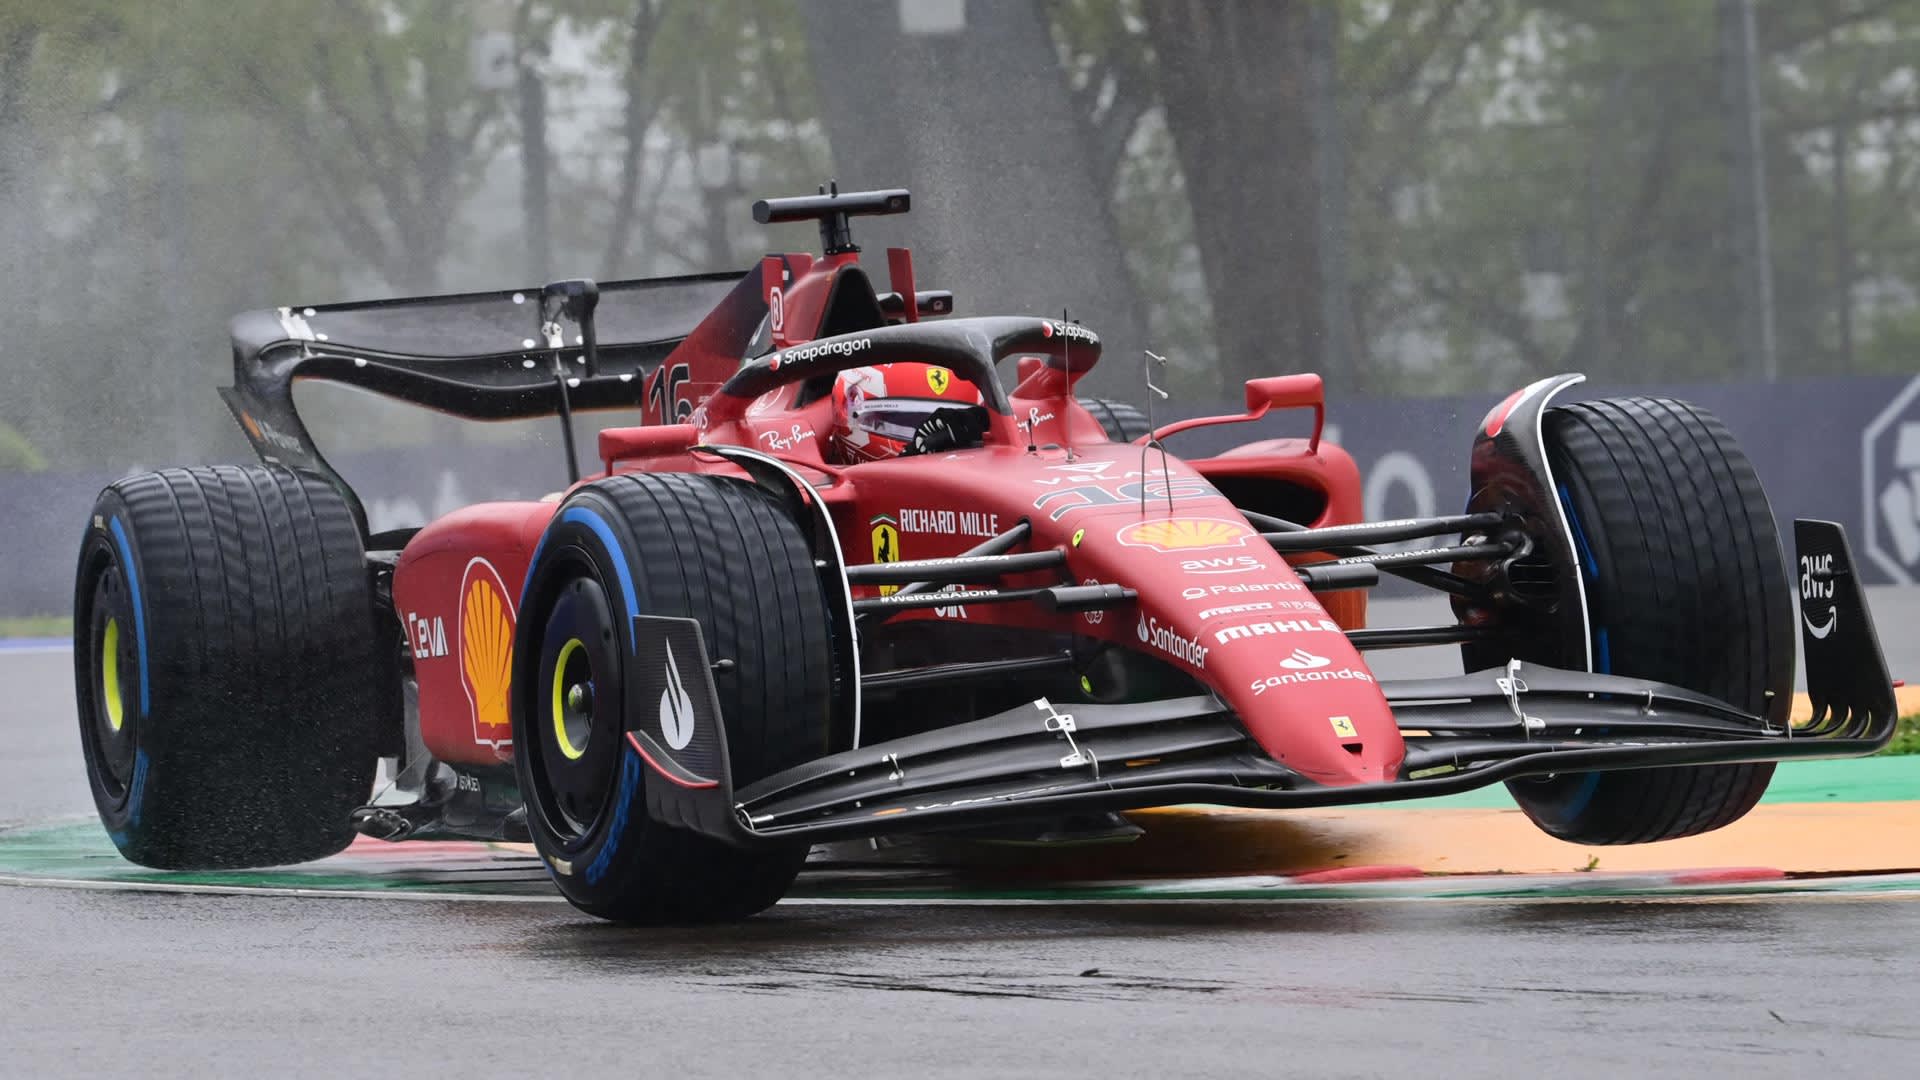 2022 Emilia Romagna Grand Prix FP1 report and highlights Charles Leclerc leads Carlos Sainz in soaked practice session ahead of qualifying Formula 1®